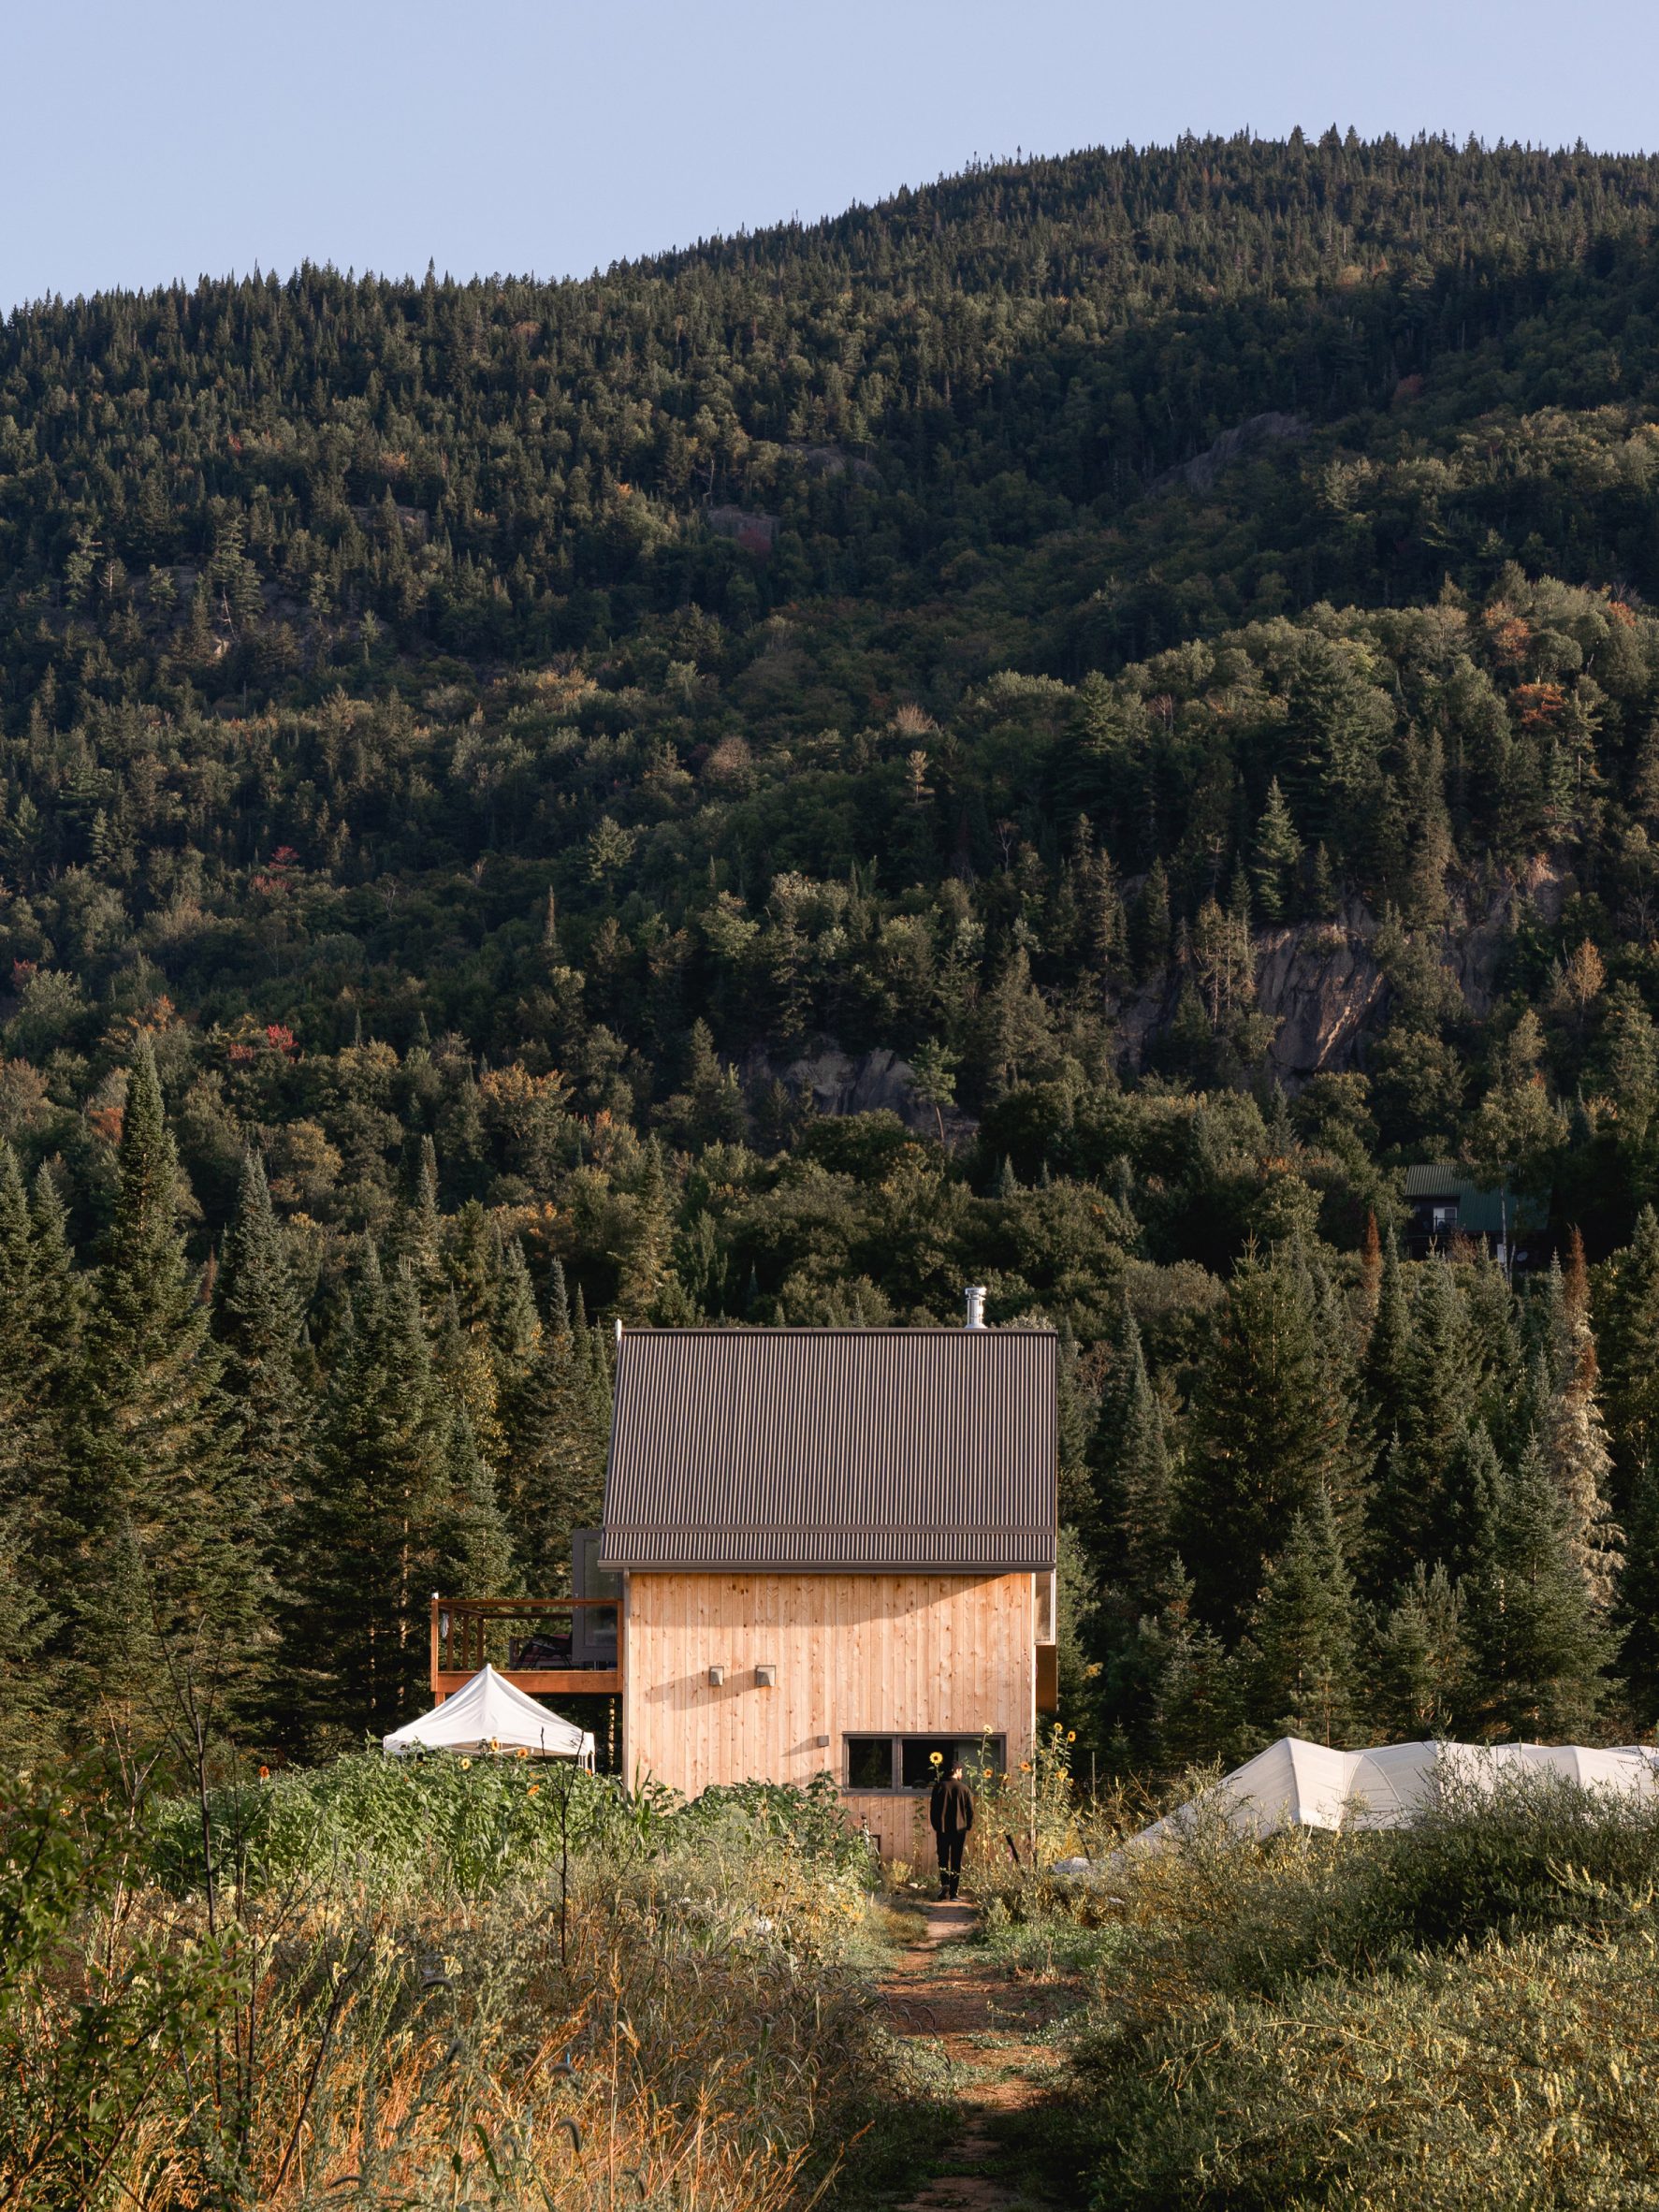 A barn in a forest landscape with timber-clad walls and charcoal roof